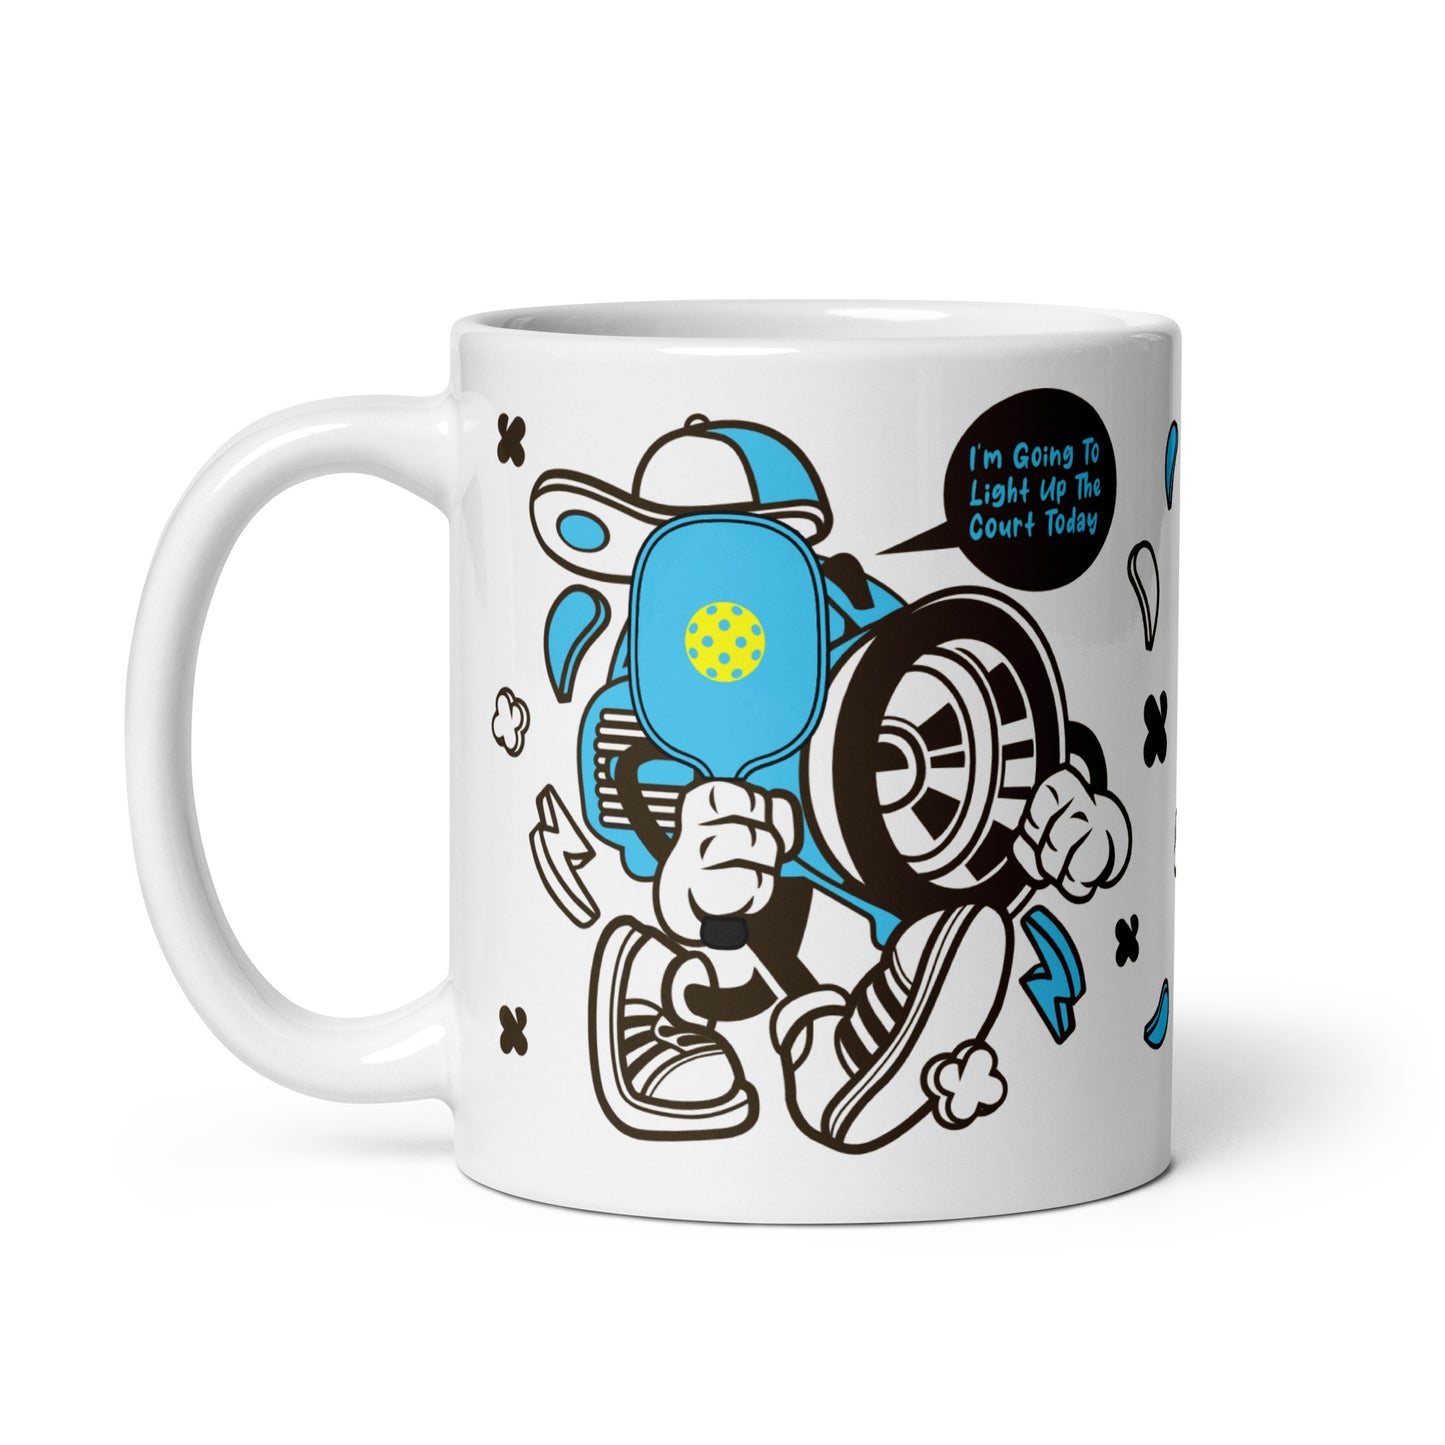 Fun Puns on Pickleball Coffee White Glossy Mug, "I'm Going To Light Up The Court Today"